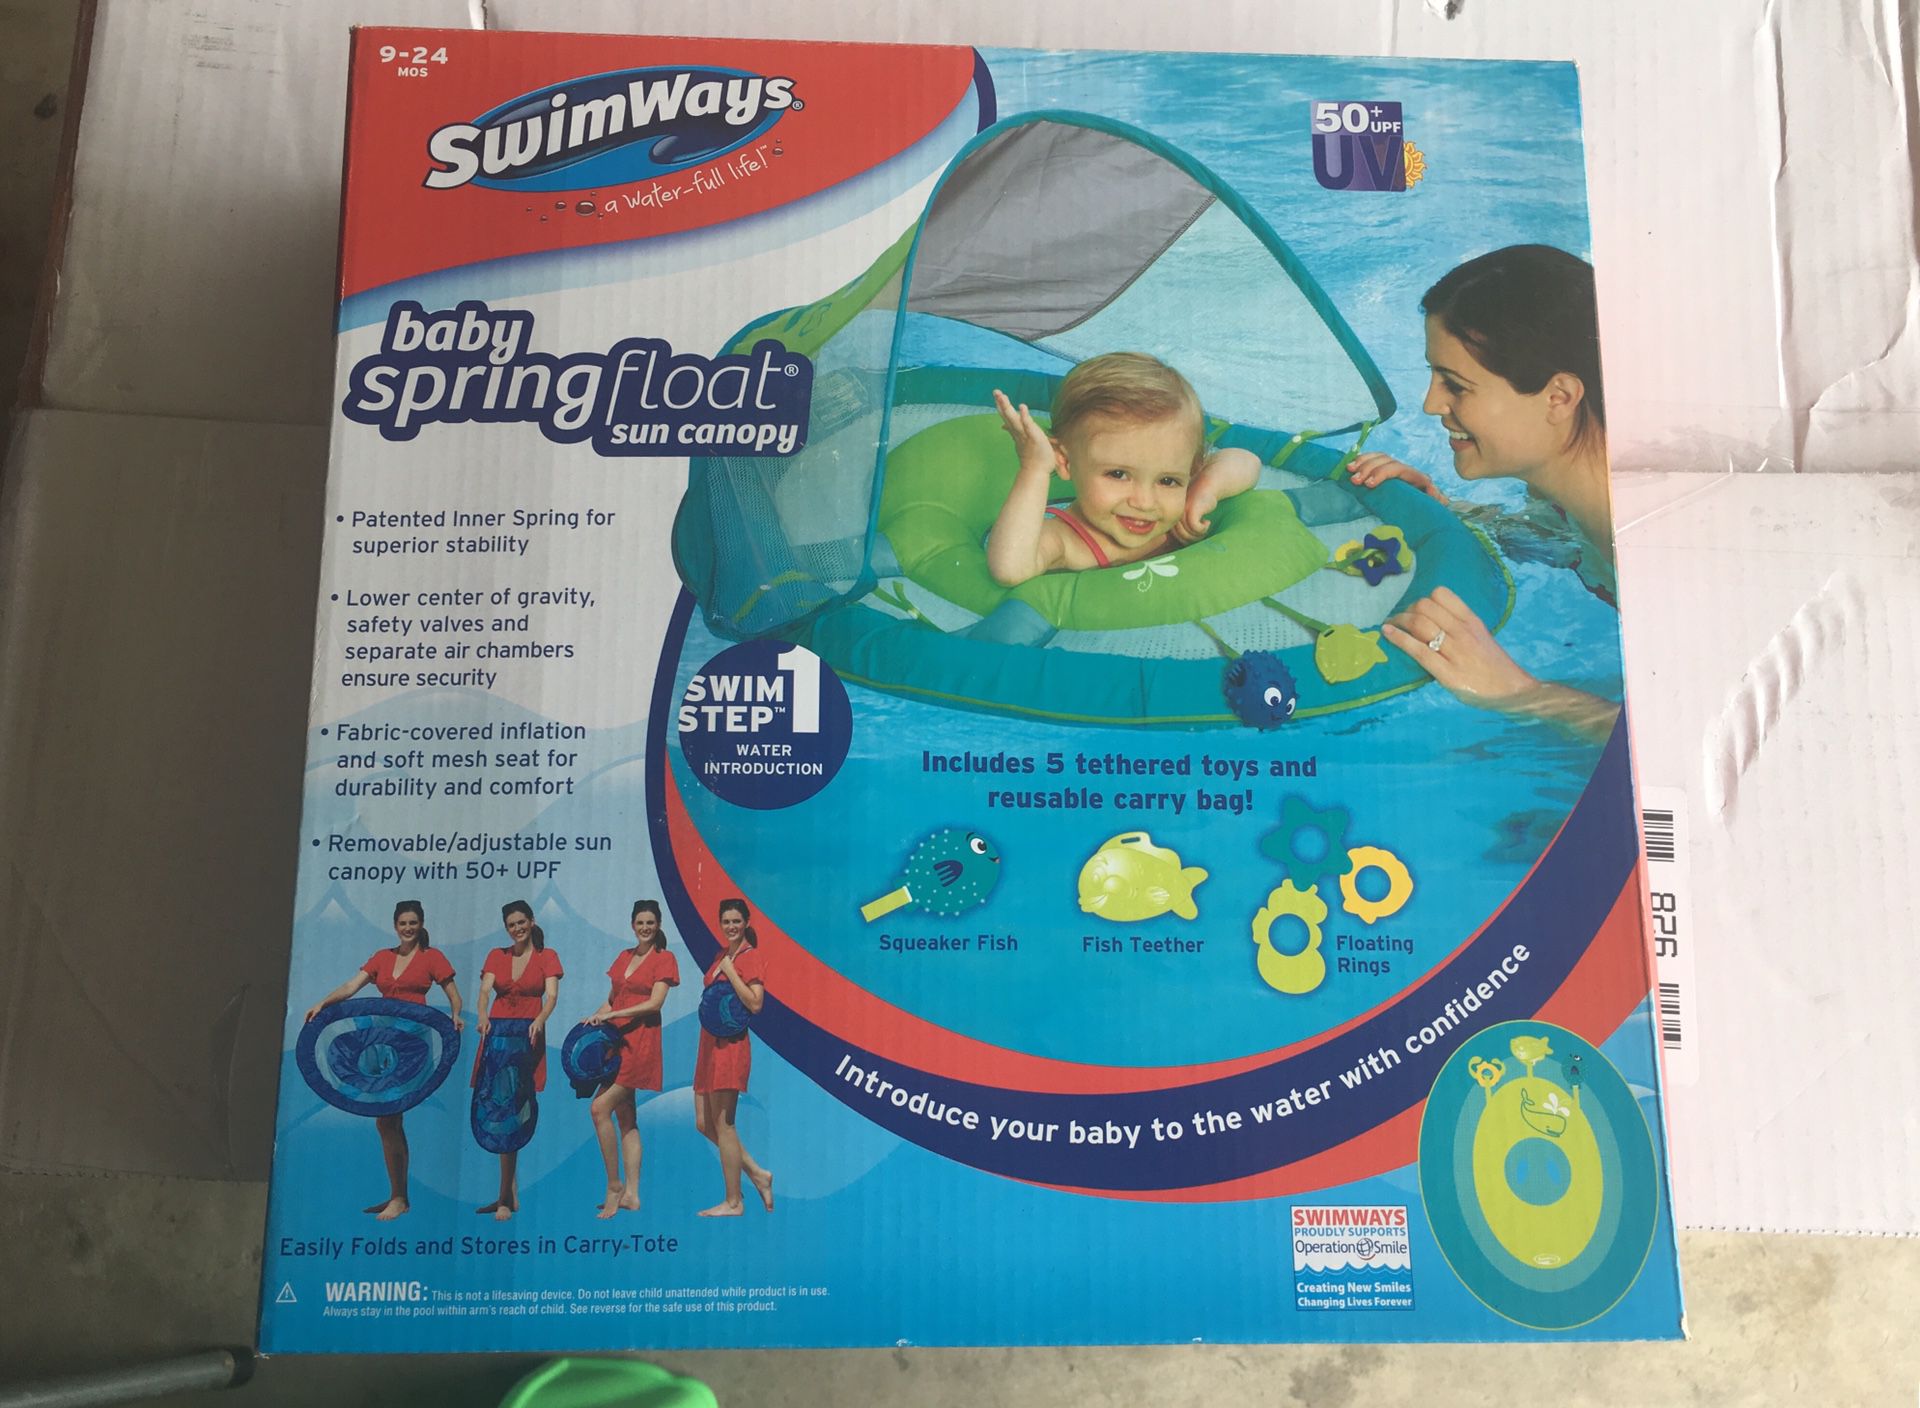 SwimWays Baby Spring Float Sun Canopy Includes 5 Tethered Toys And Reusable Carry Bag